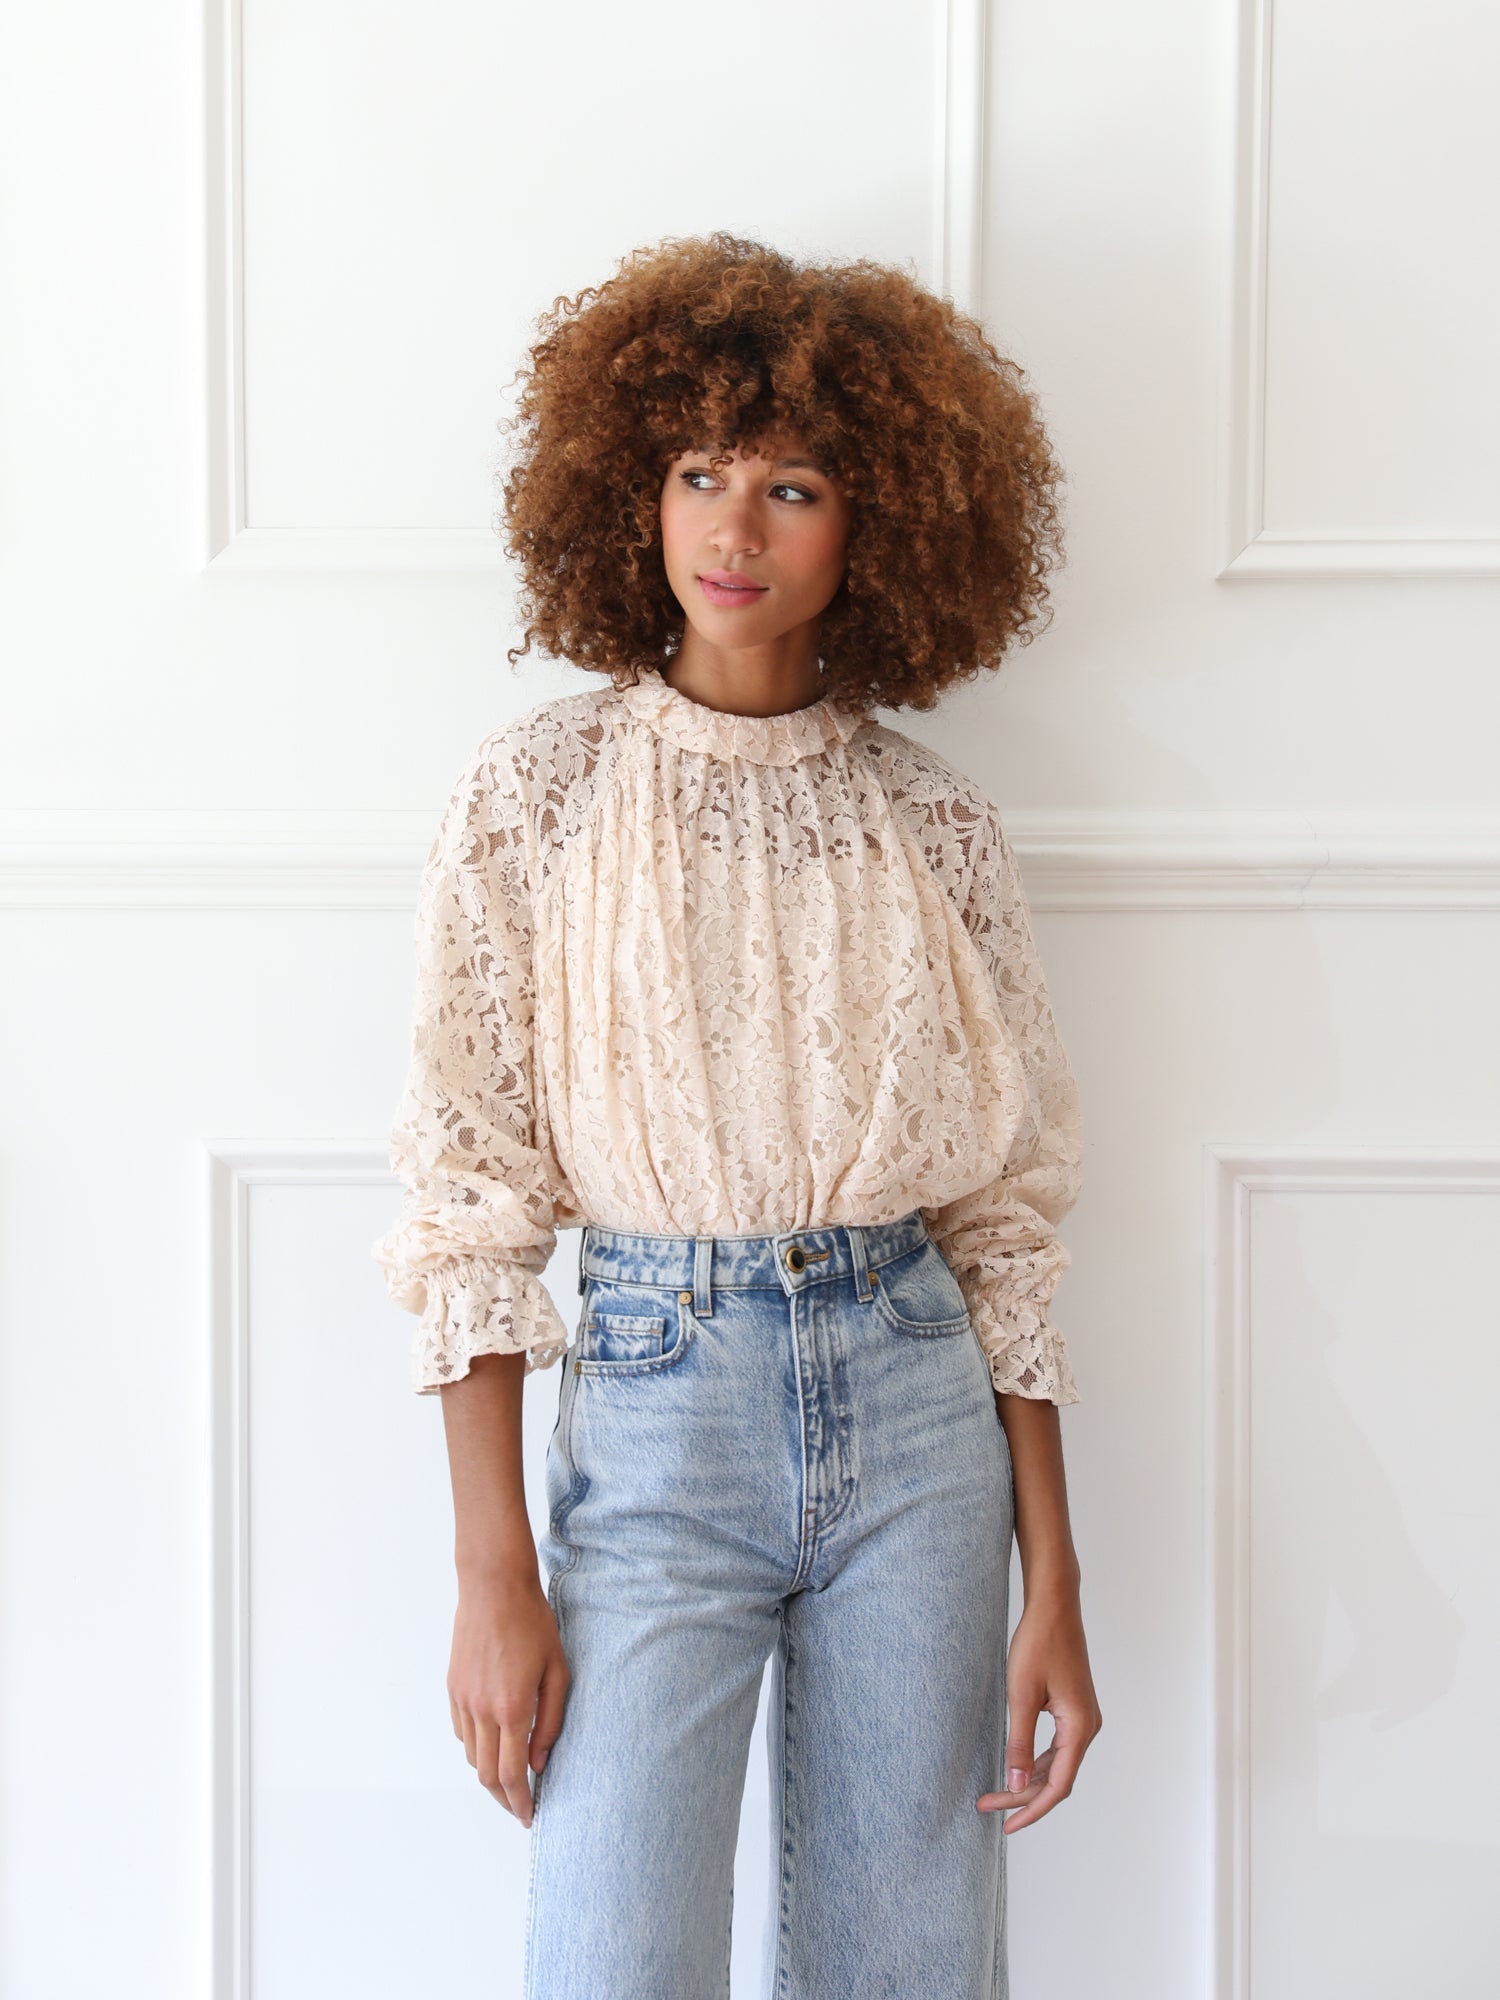 MILLE Clothing Chantal Top in Vanilla Lace